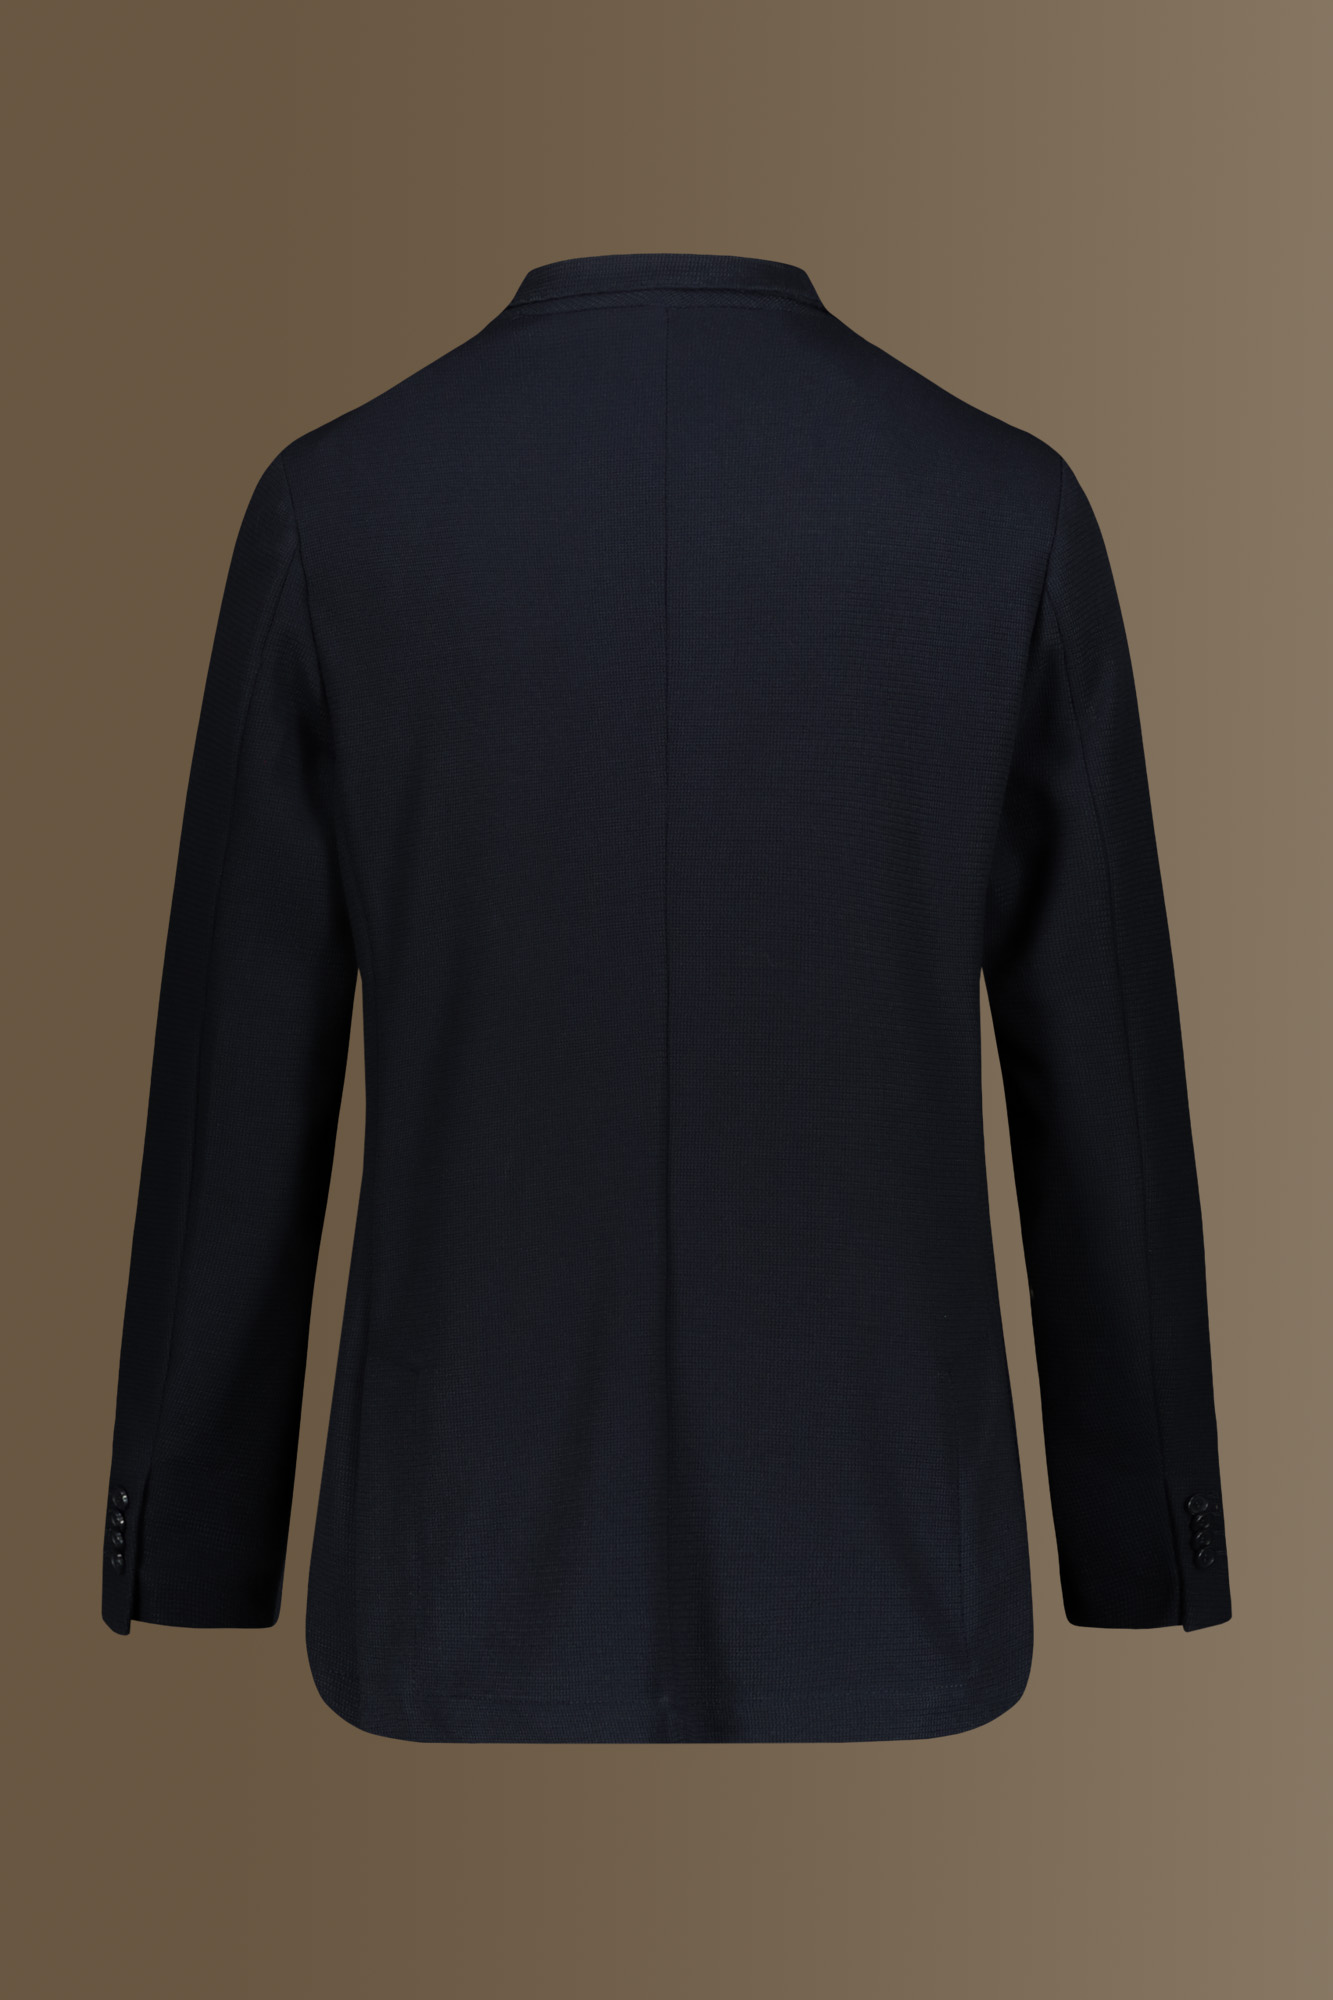 Giacca uomo monopetto in jersey piquet con tasca a toppa dark blue Made in italy image number null